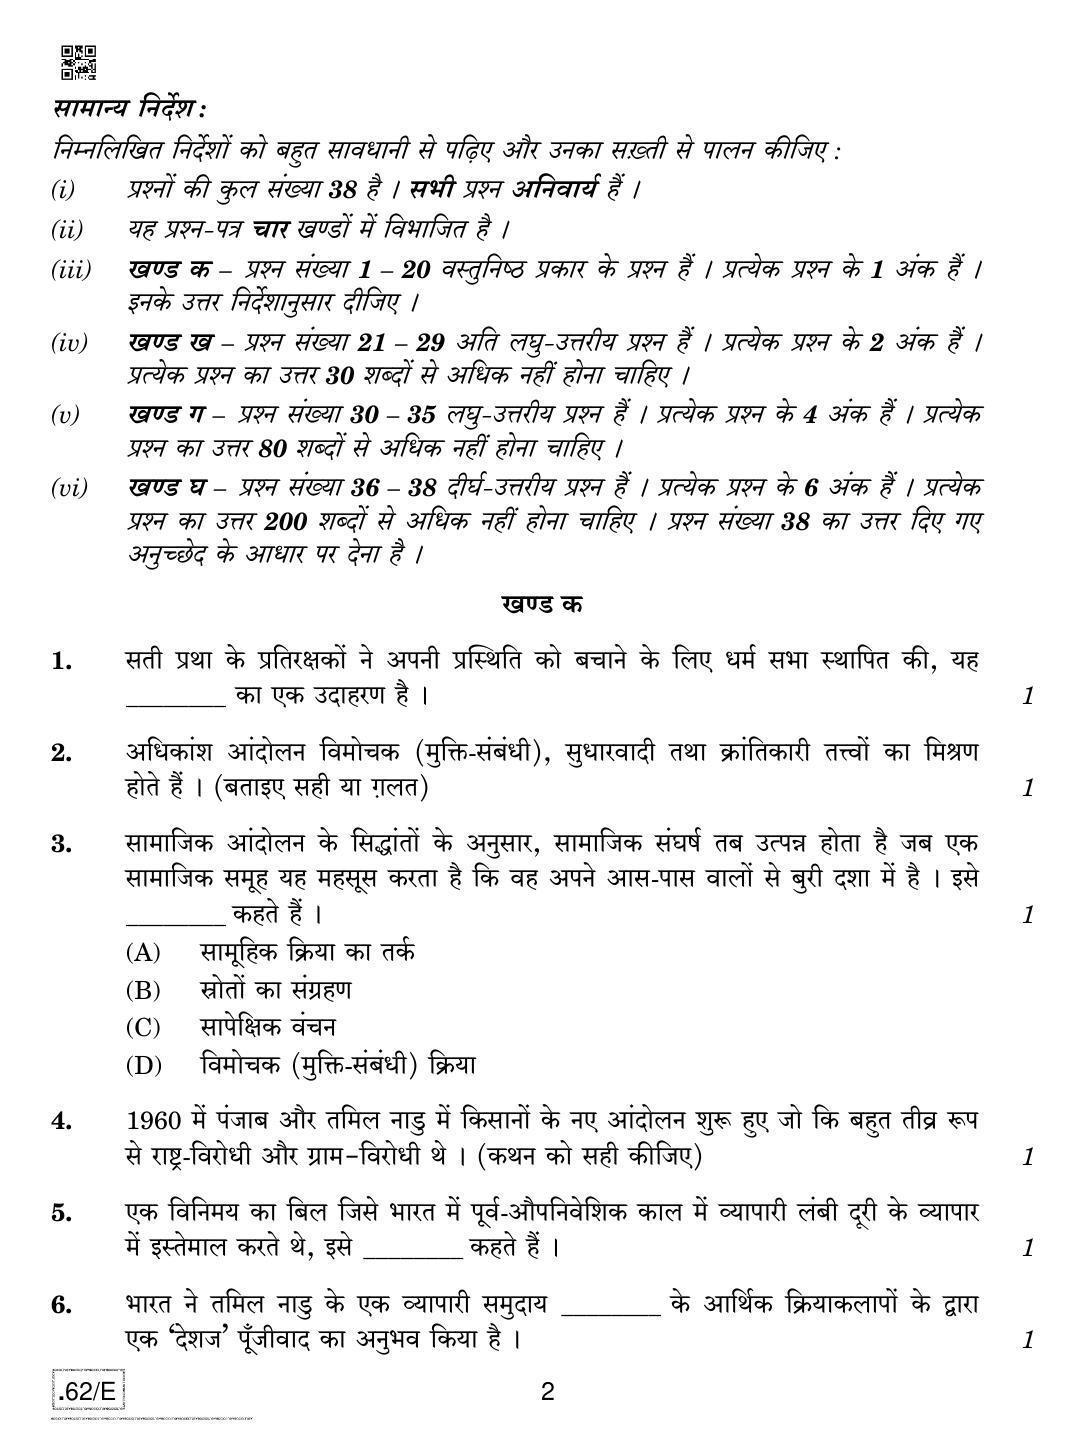 CBSE Class 12 Sociology 2020 Compartment Question Paper - Page 2